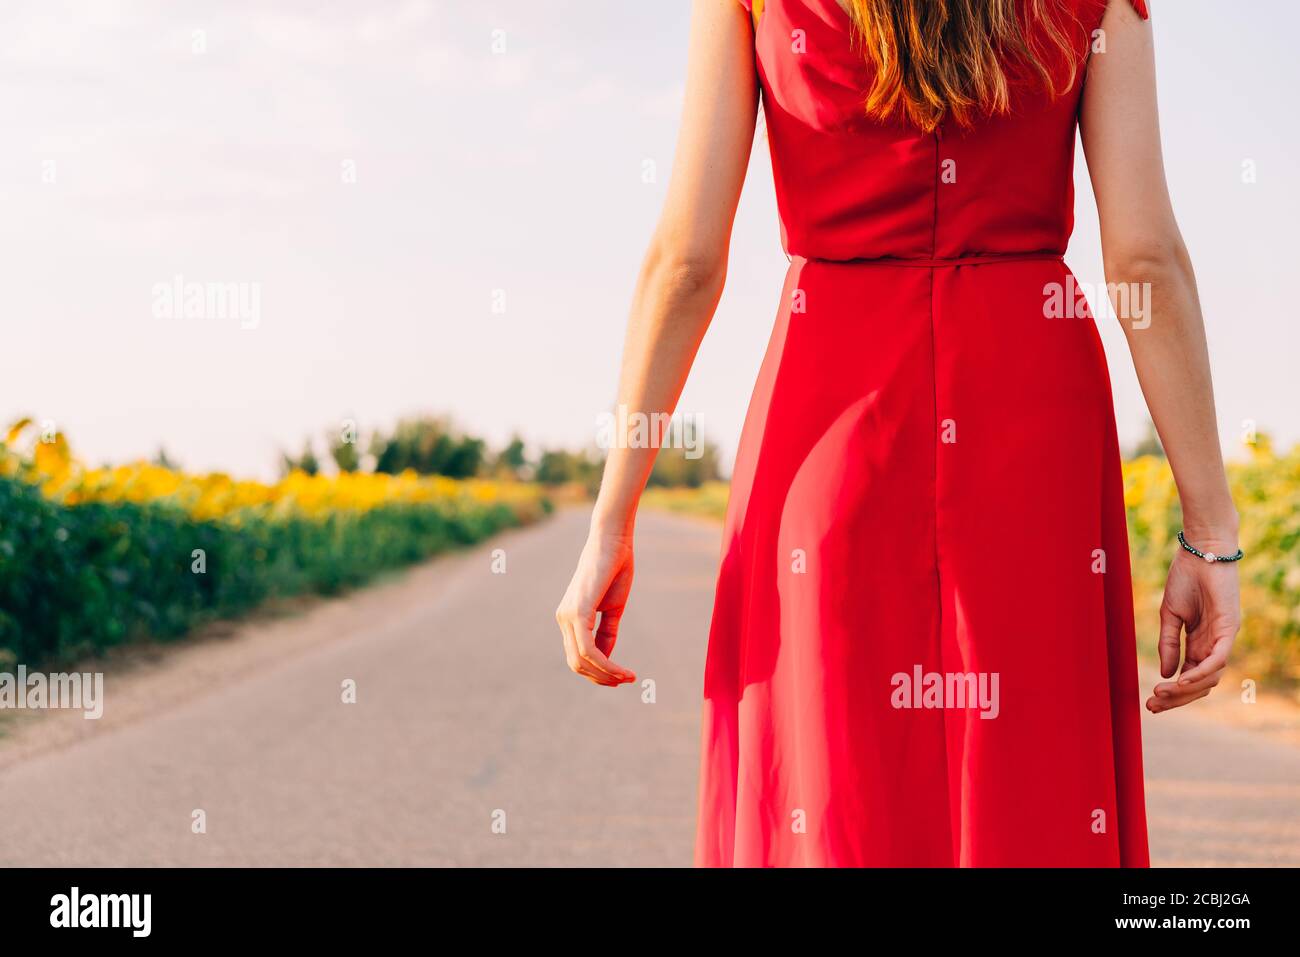 woman with red dress backwards in road with sunflowers Stock Photo